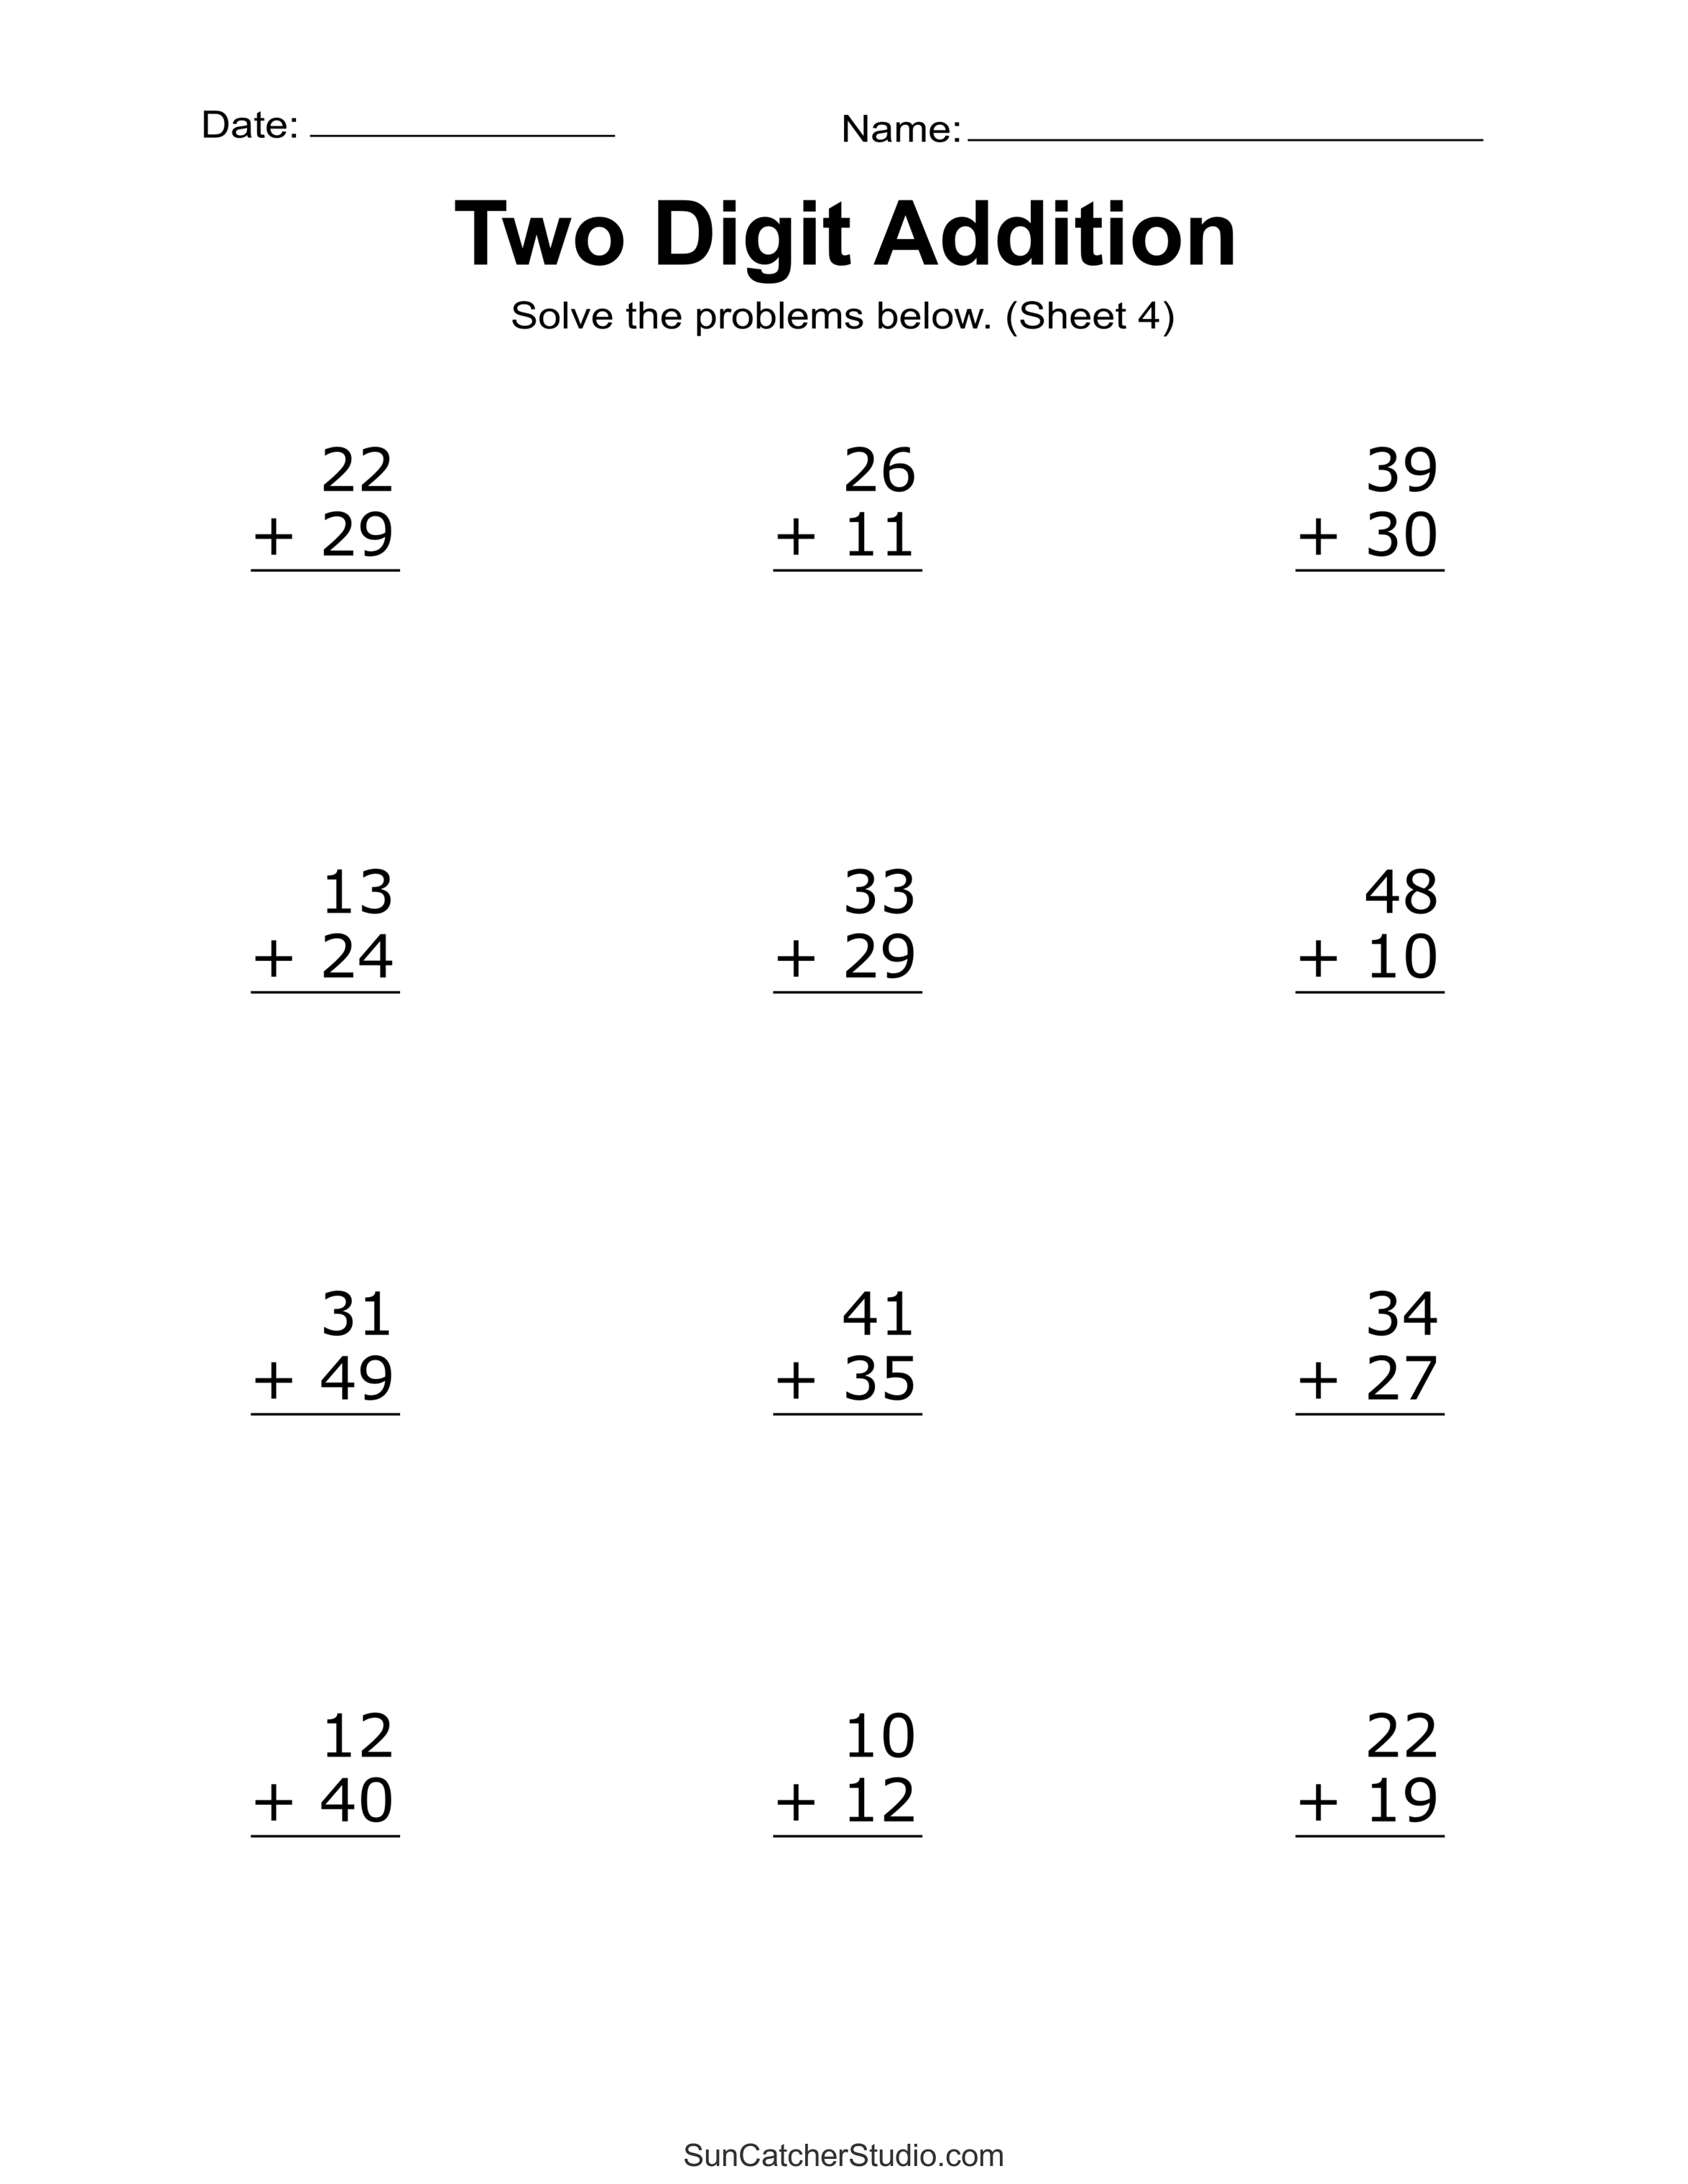 Two Digit Addition Worksheets Printable 2 Digit Problems DIY Projects Patterns Monograms Designs Templates